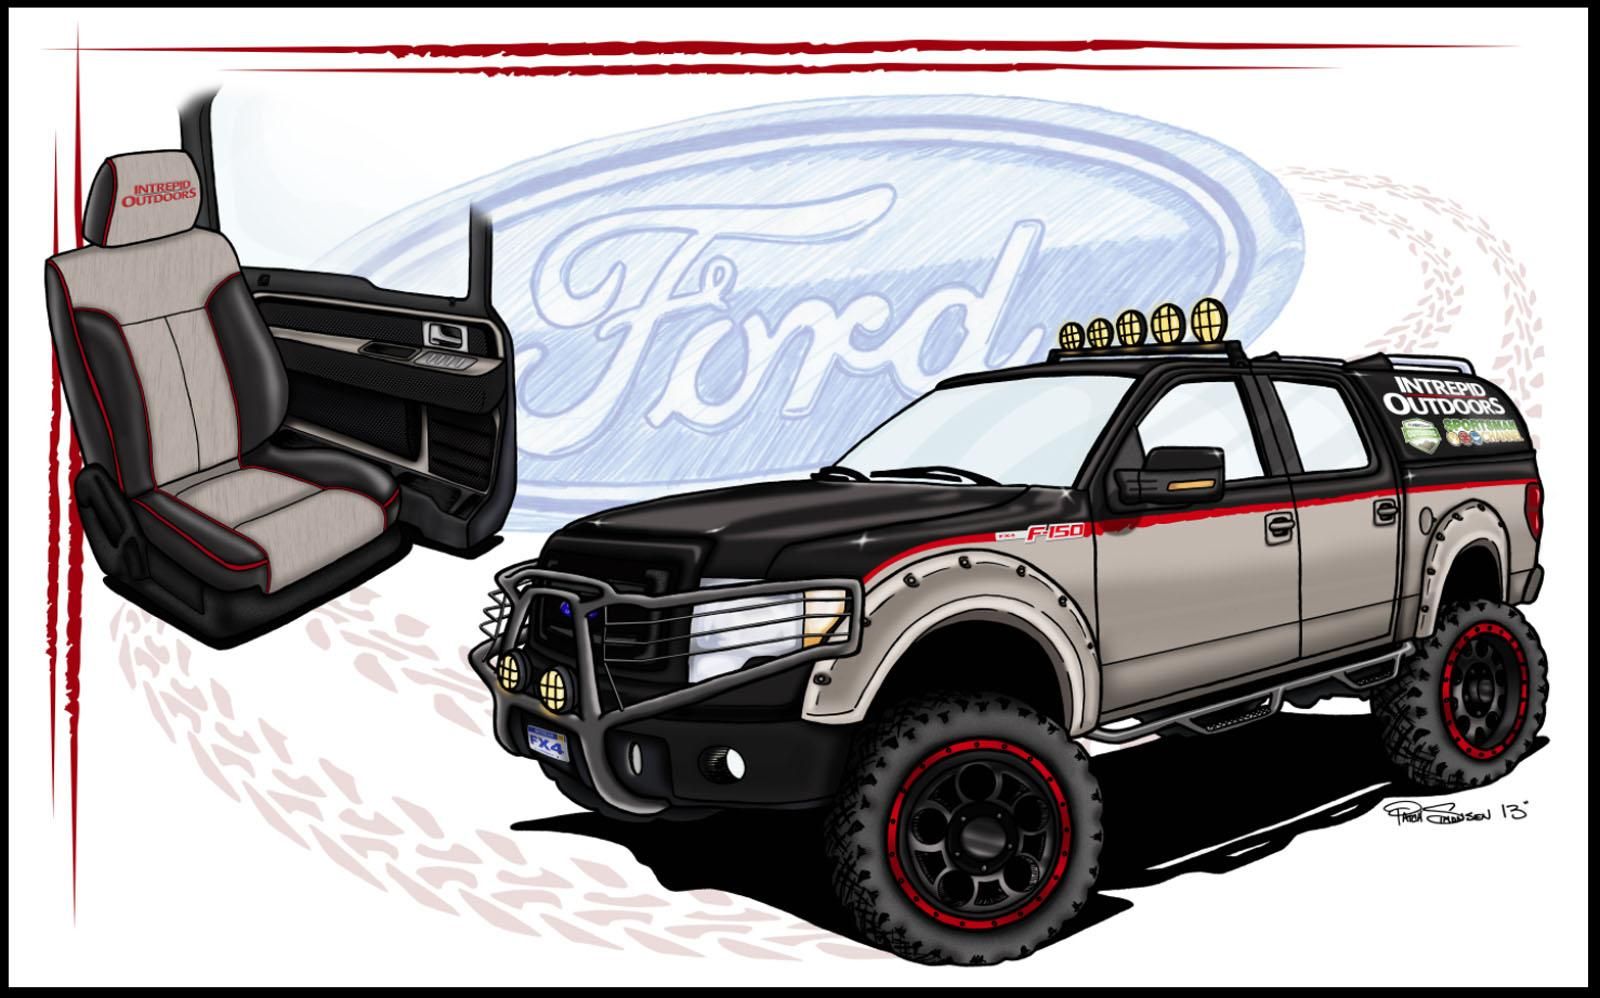 2014 Ford F-150 Adventure Edition by The Sportsman Channel